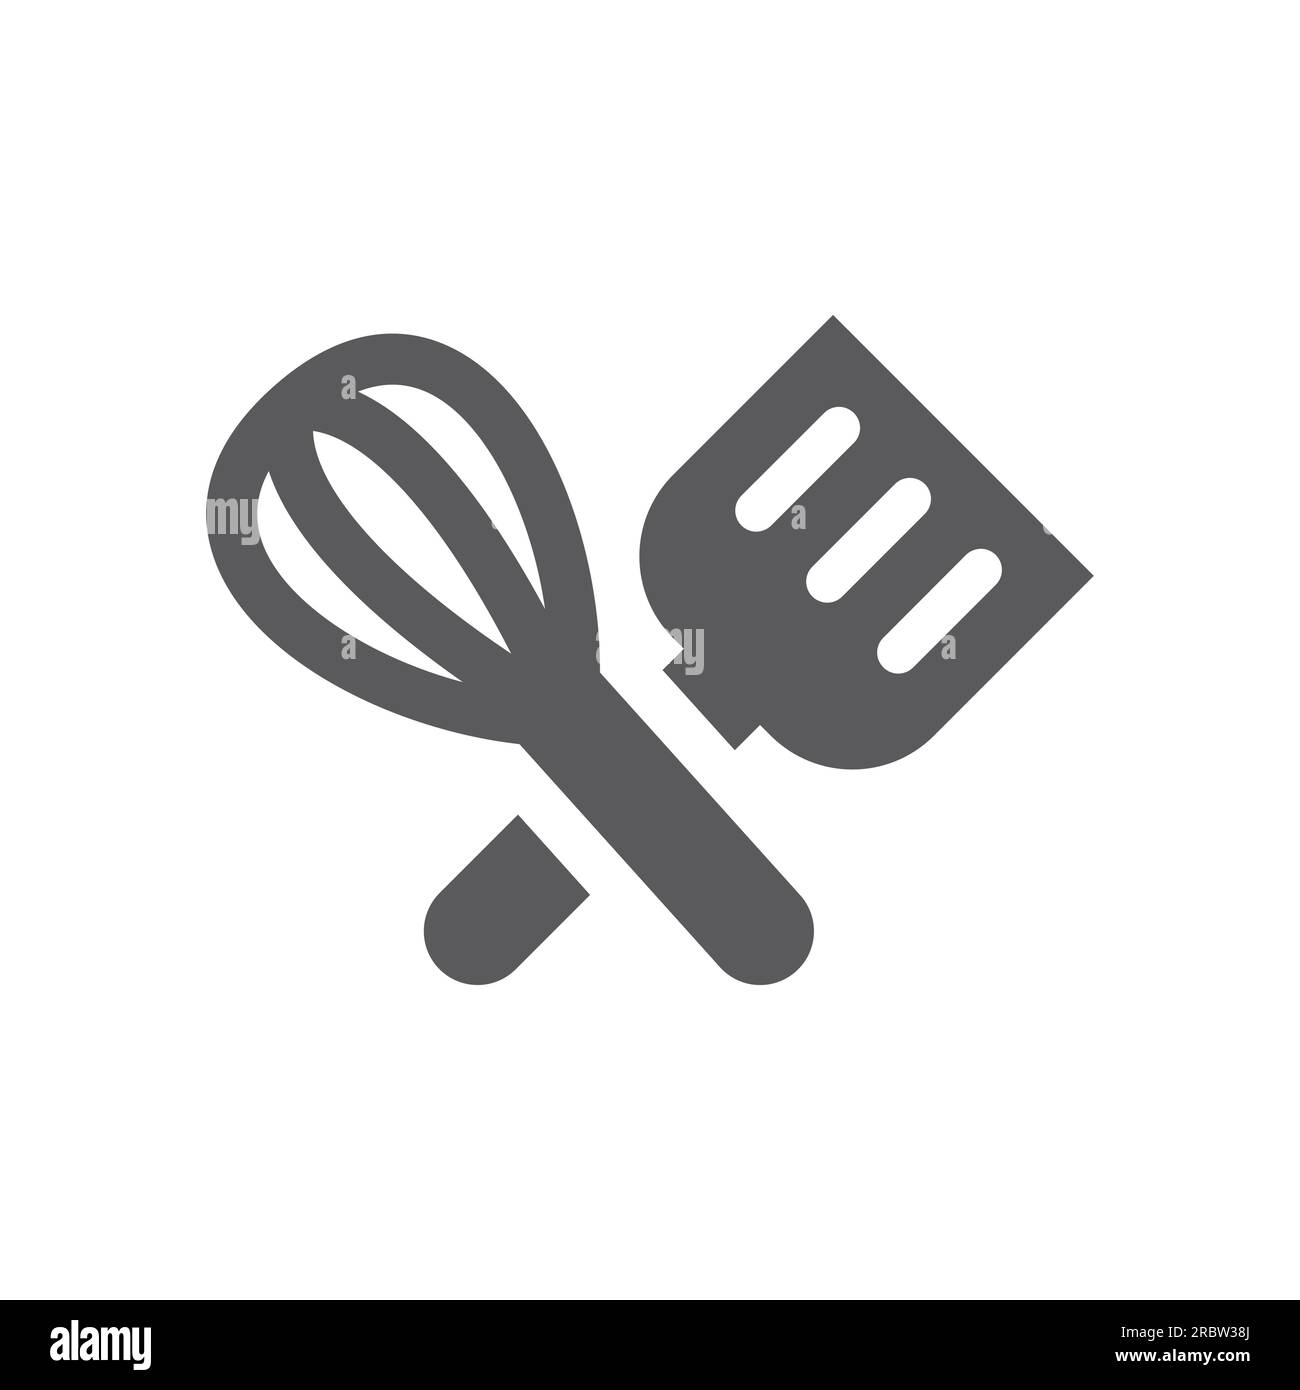 https://c8.alamy.com/comp/2RBW38J/spatula-and-egg-beater-whisk-crossed-cooking-food-and-kitchen-vector-icon-2RBW38J.jpg